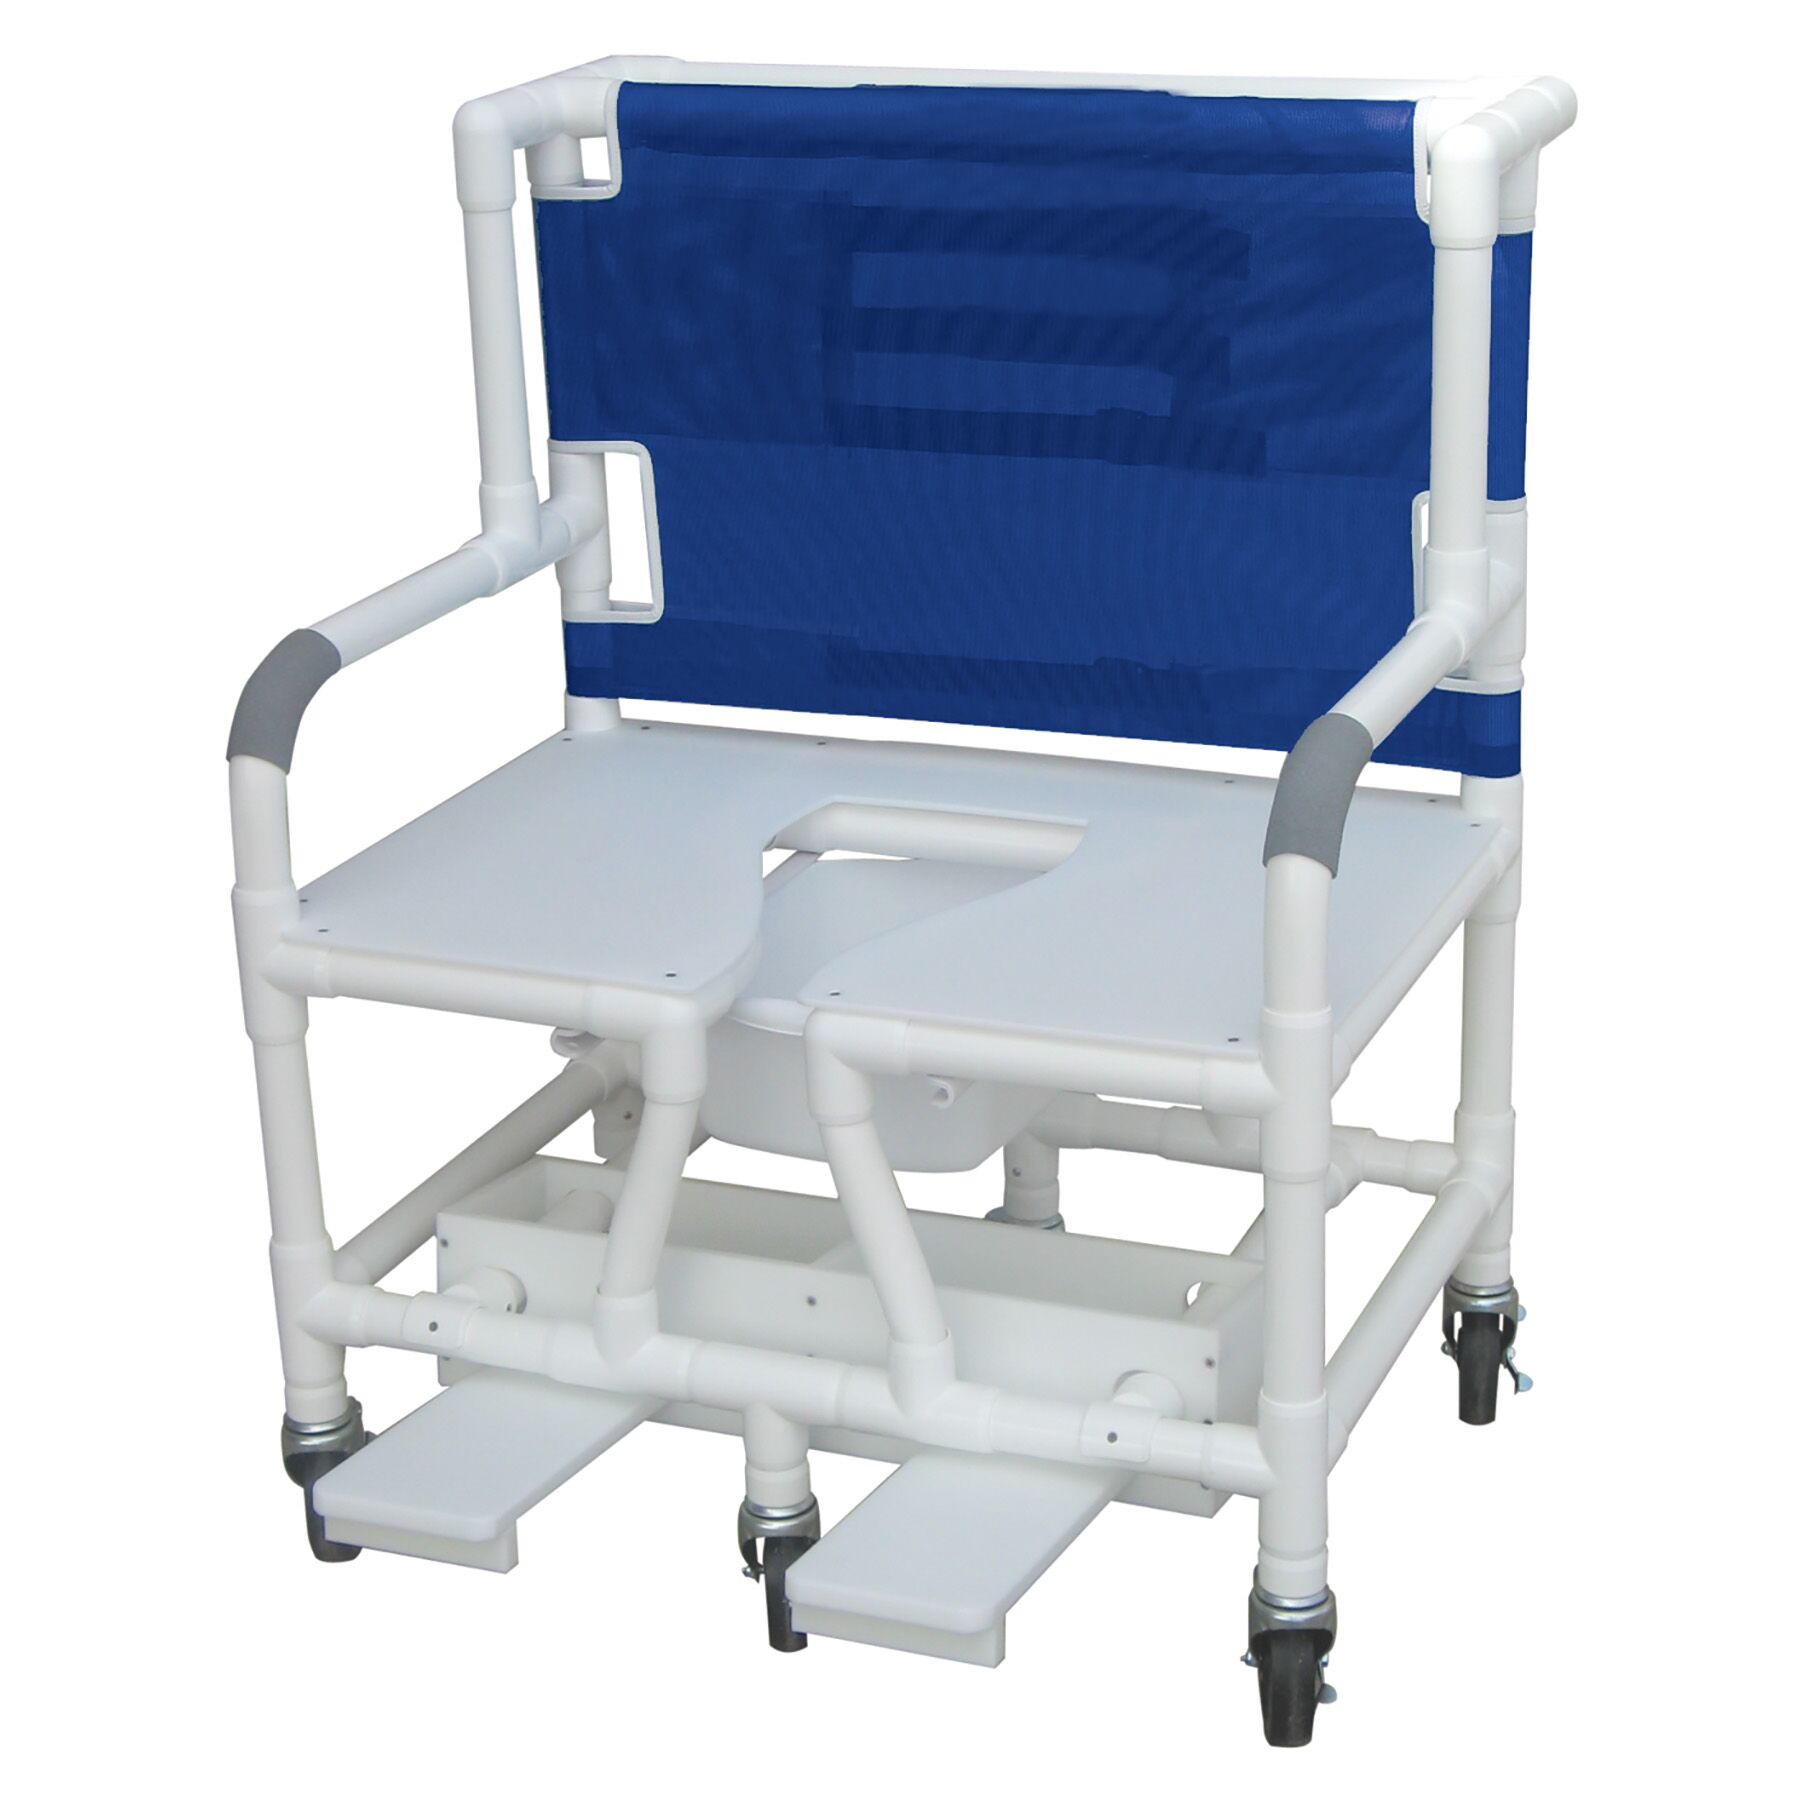 30″ Bariatric Shower Chair W/ Full Support Seat And Commode Opening